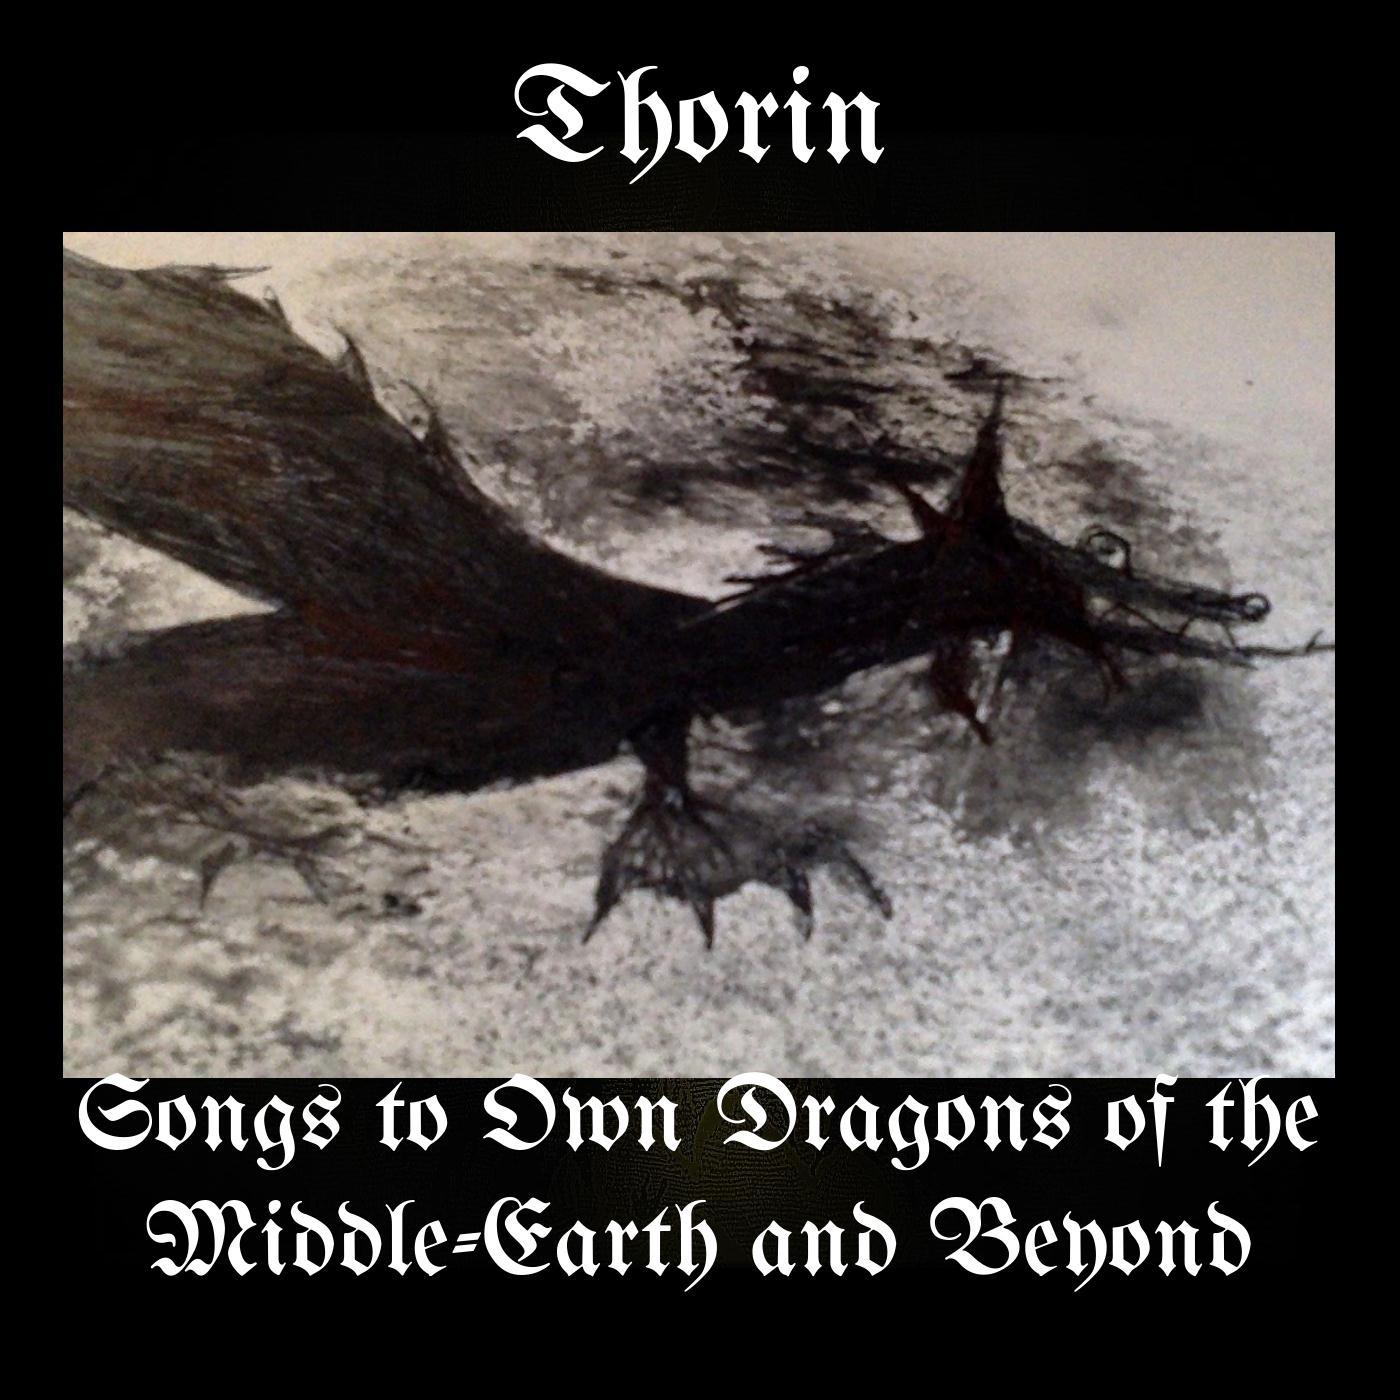 Songs to Own Dragons of the Middle-Earth and Beyond